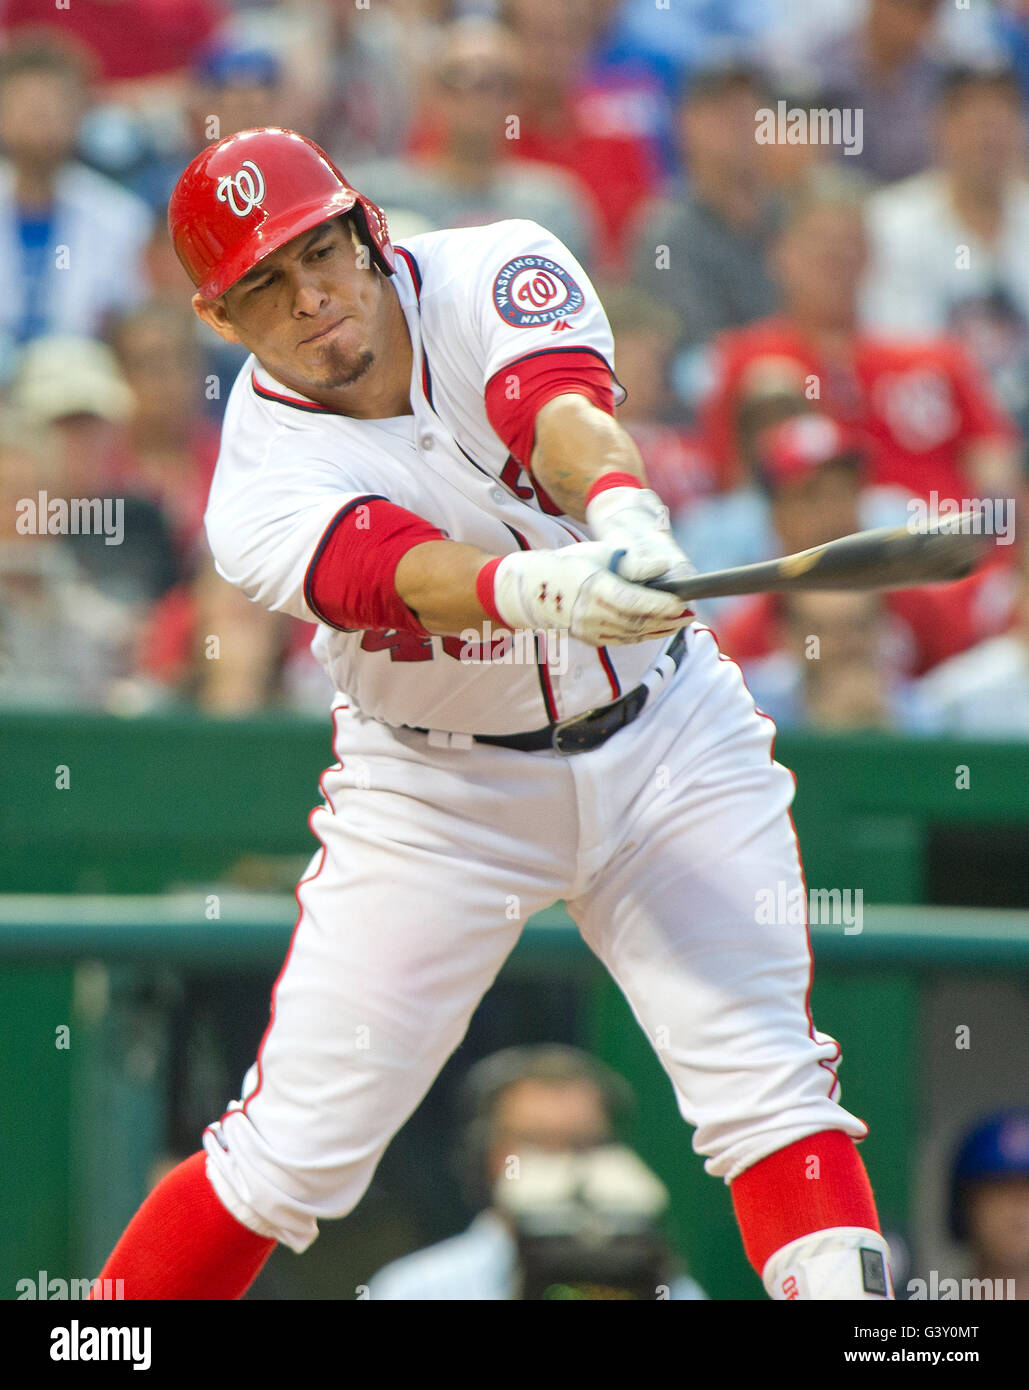 Innings. 15th June, 2016. Washington Nationals catcher Wilson Ramos (40) bats in the eleventh inning against the Chicago Cubs at Nationals Park in Washington, DC on Wednesday, June 15, 2016. The Nationals won the game 5 - 4 in 12 innings. Credit: Ron Sachs/CNP - NO WIRE SERVICE - Credit:  dpa/Alamy Live News Stock Photo